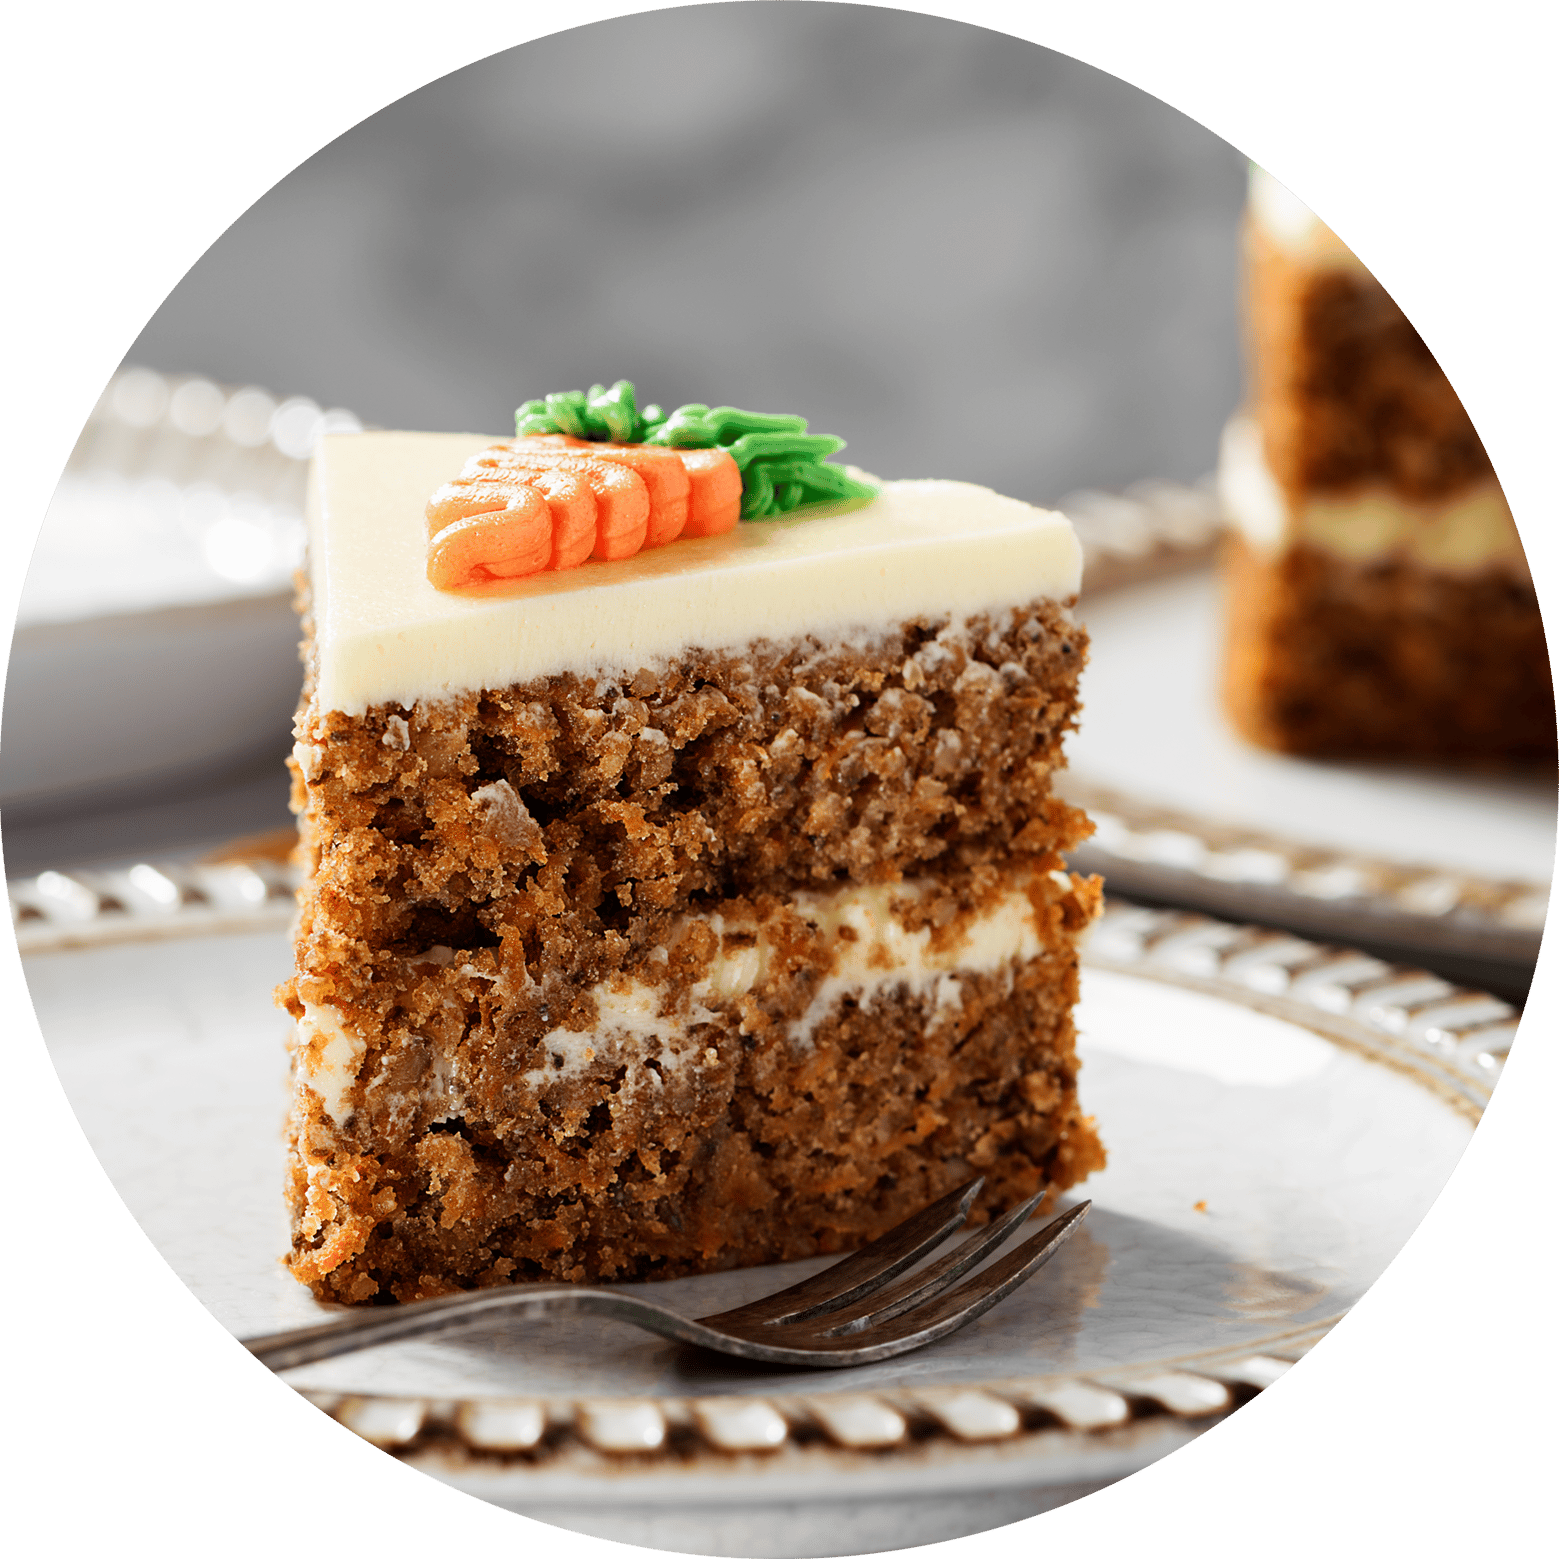 Slice of carrot cake with a fork on a fancy plate